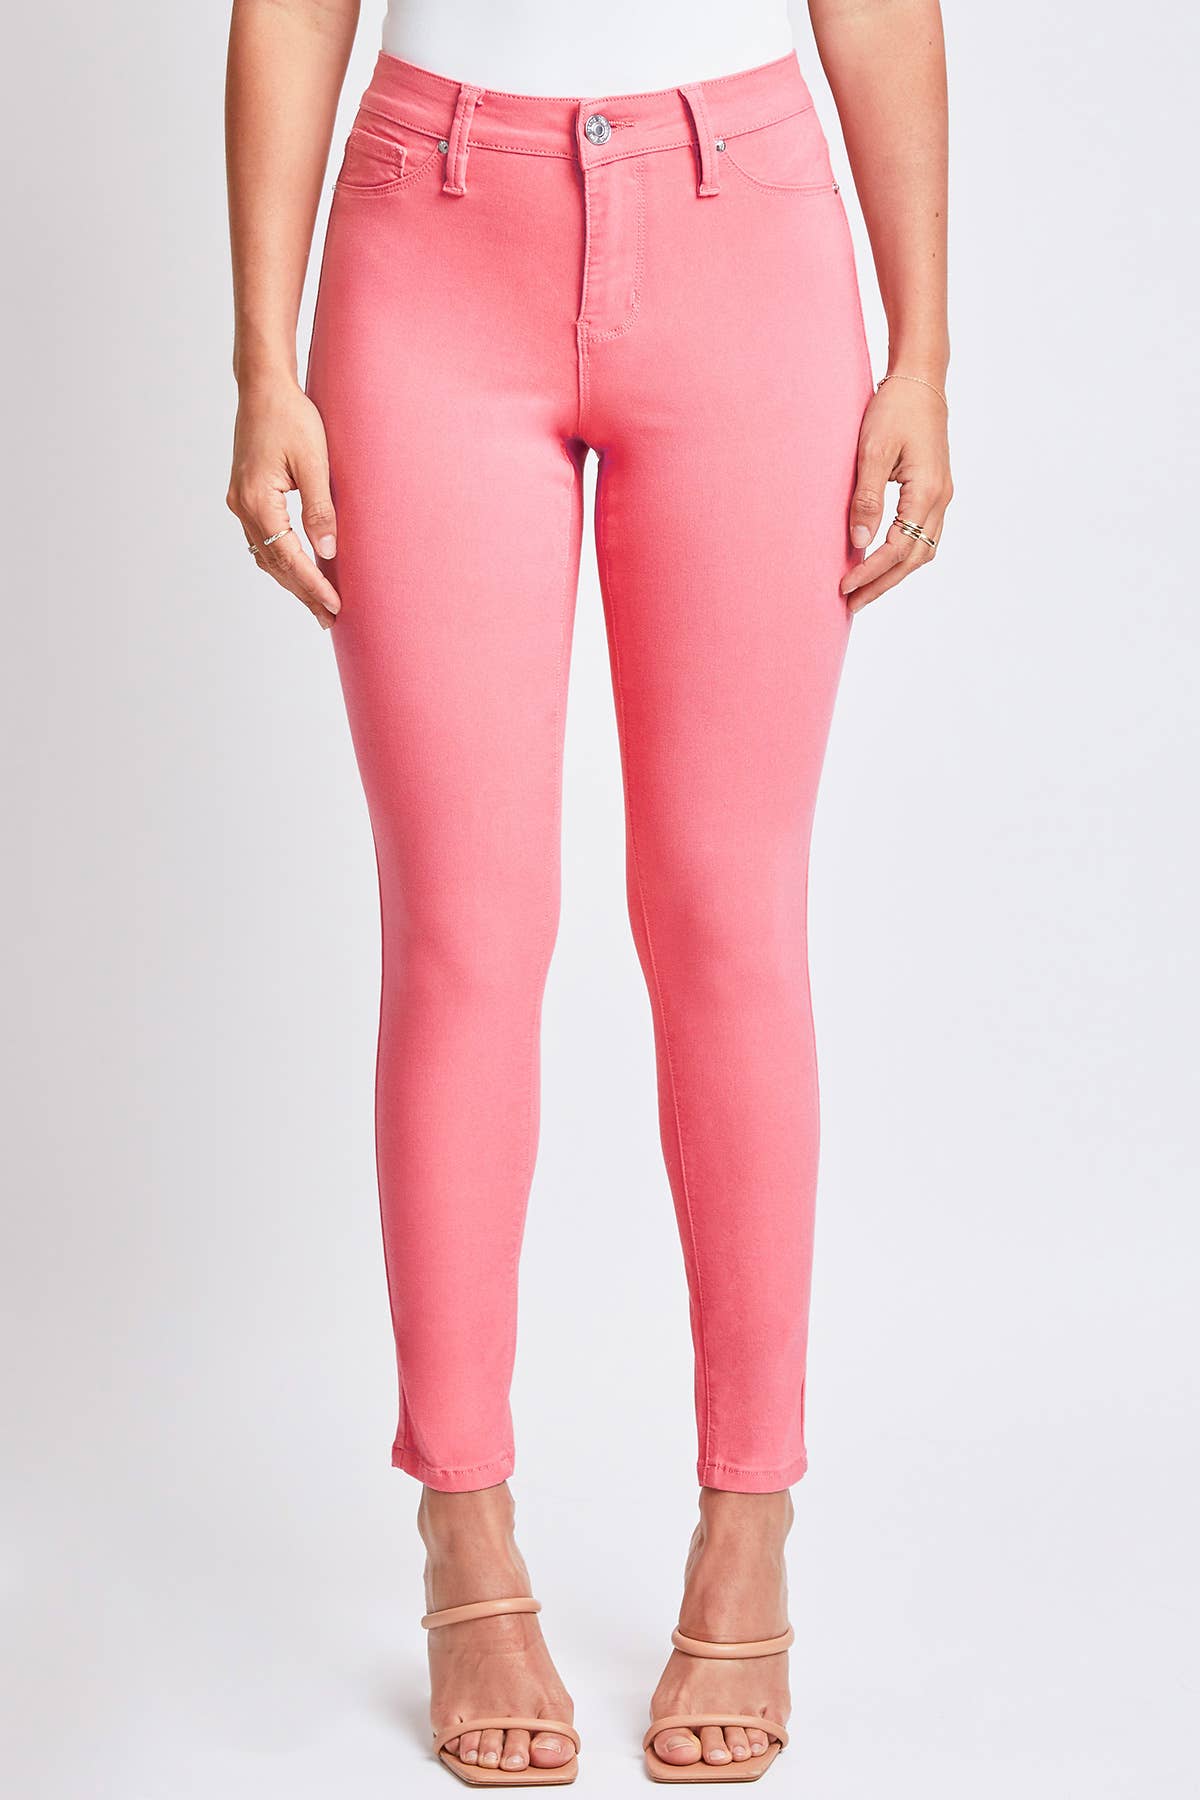 Hyperstretch Mid-Rise Colored Skinny Jean